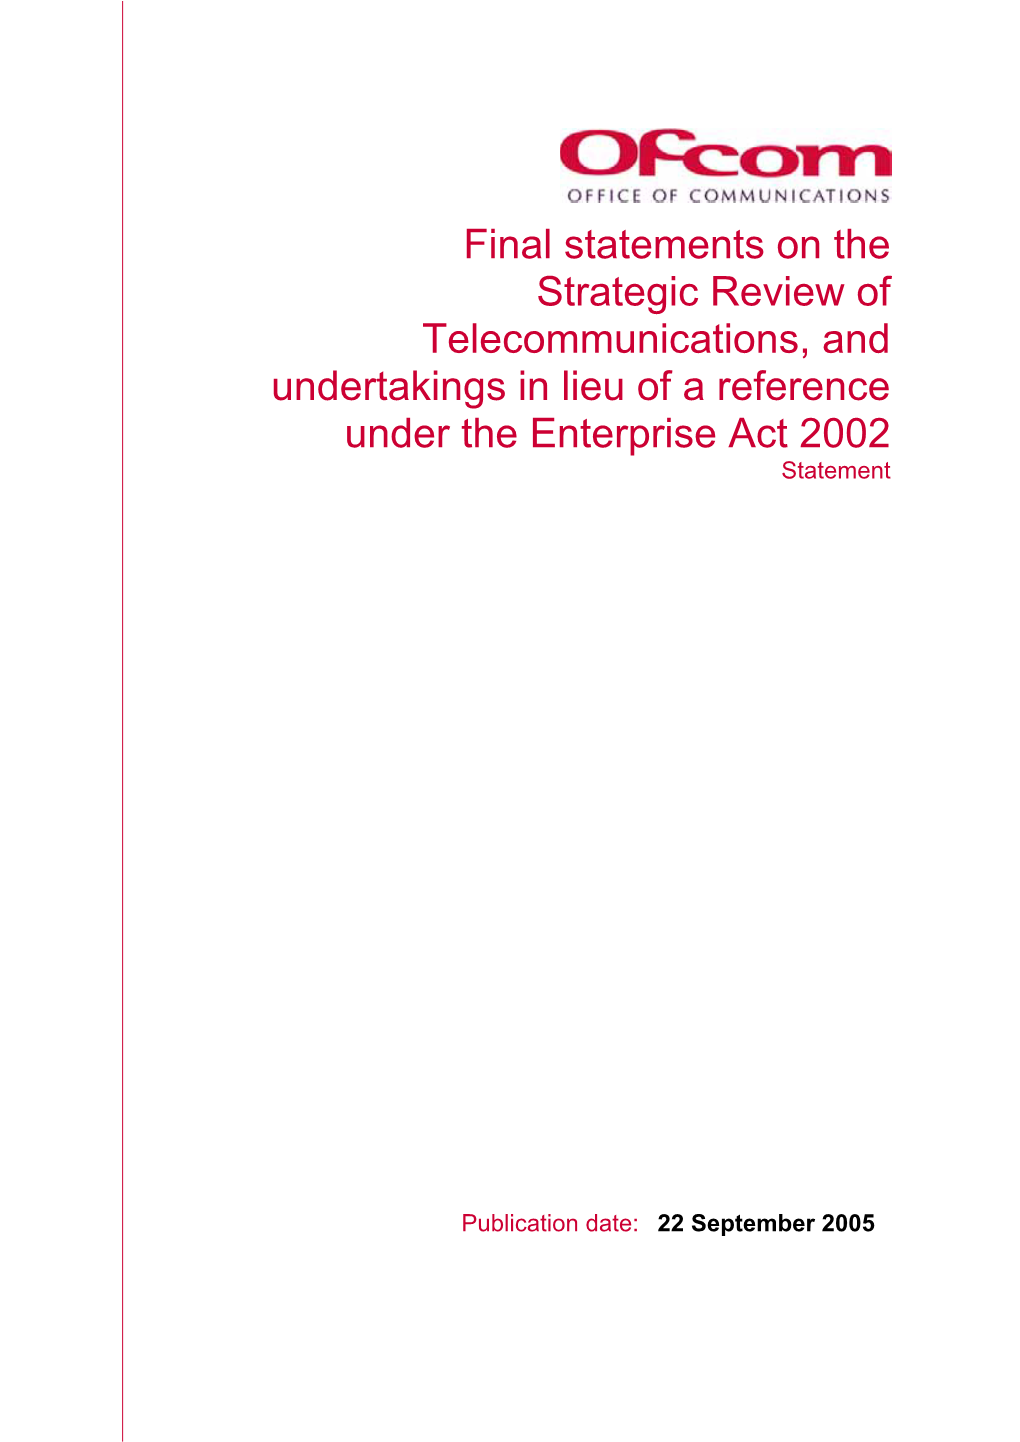 Final Statements on the Strategic Review of Telecommunications, and Undertakings in Lieu of a Reference Under the Enterprise Act 2002 Statement